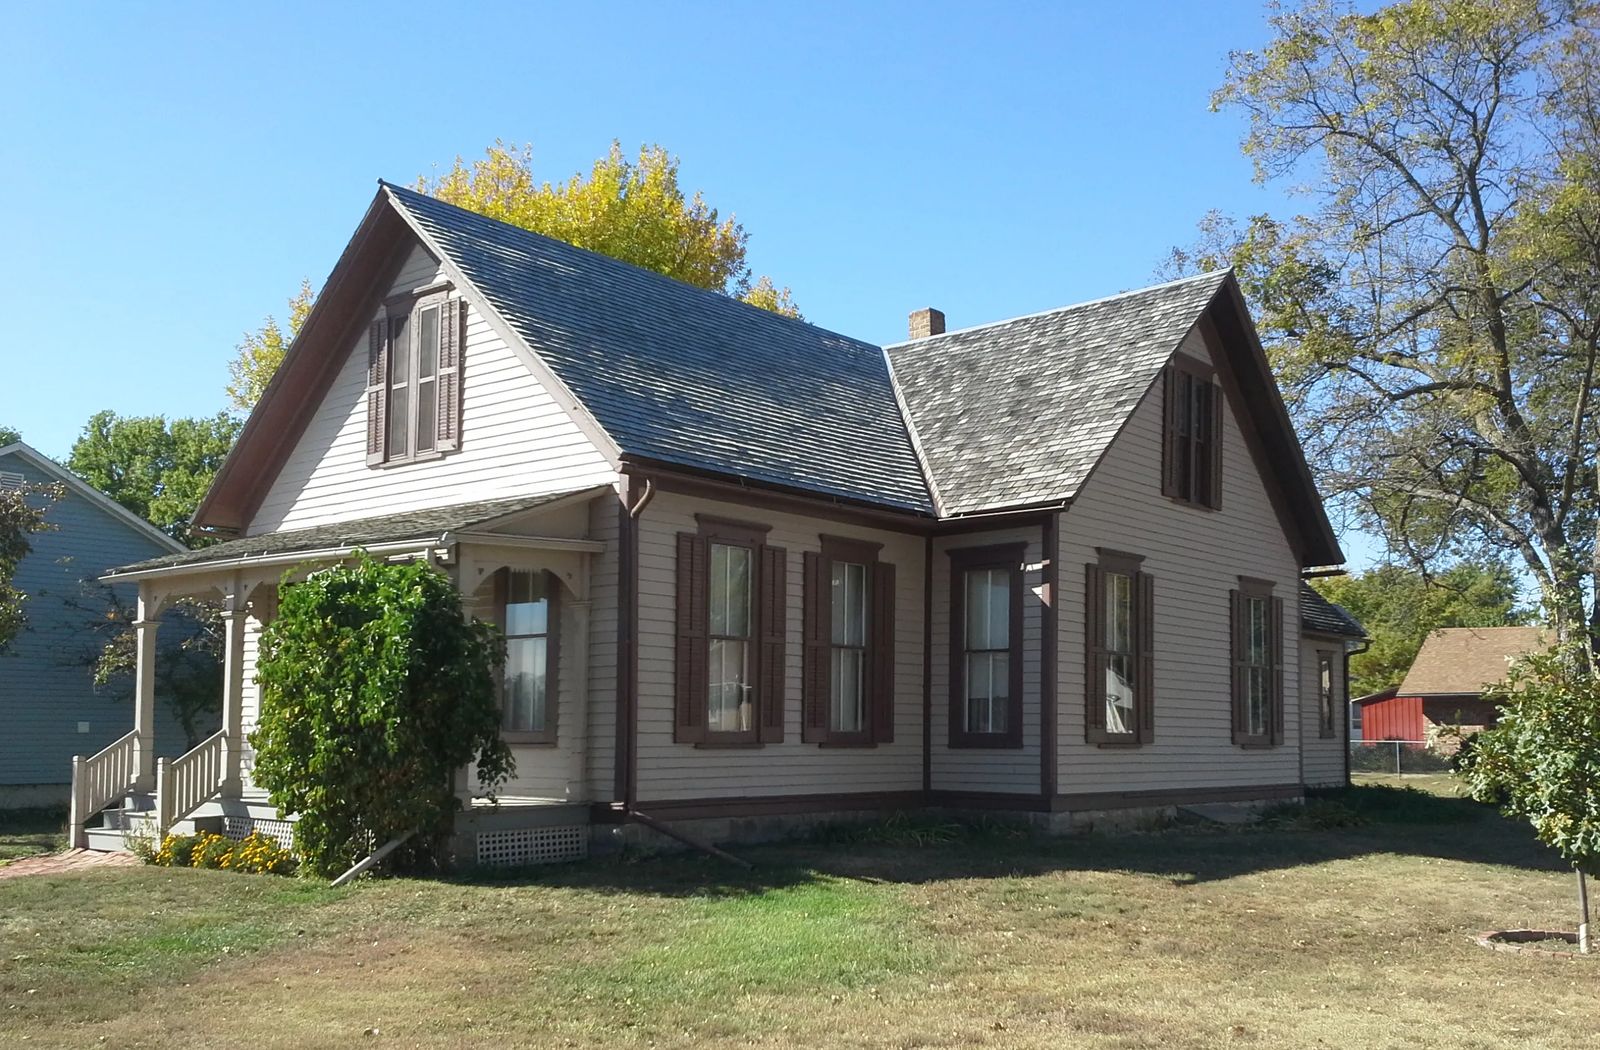 Photo of Willa Cather Home in Red Cloud, Nebraska